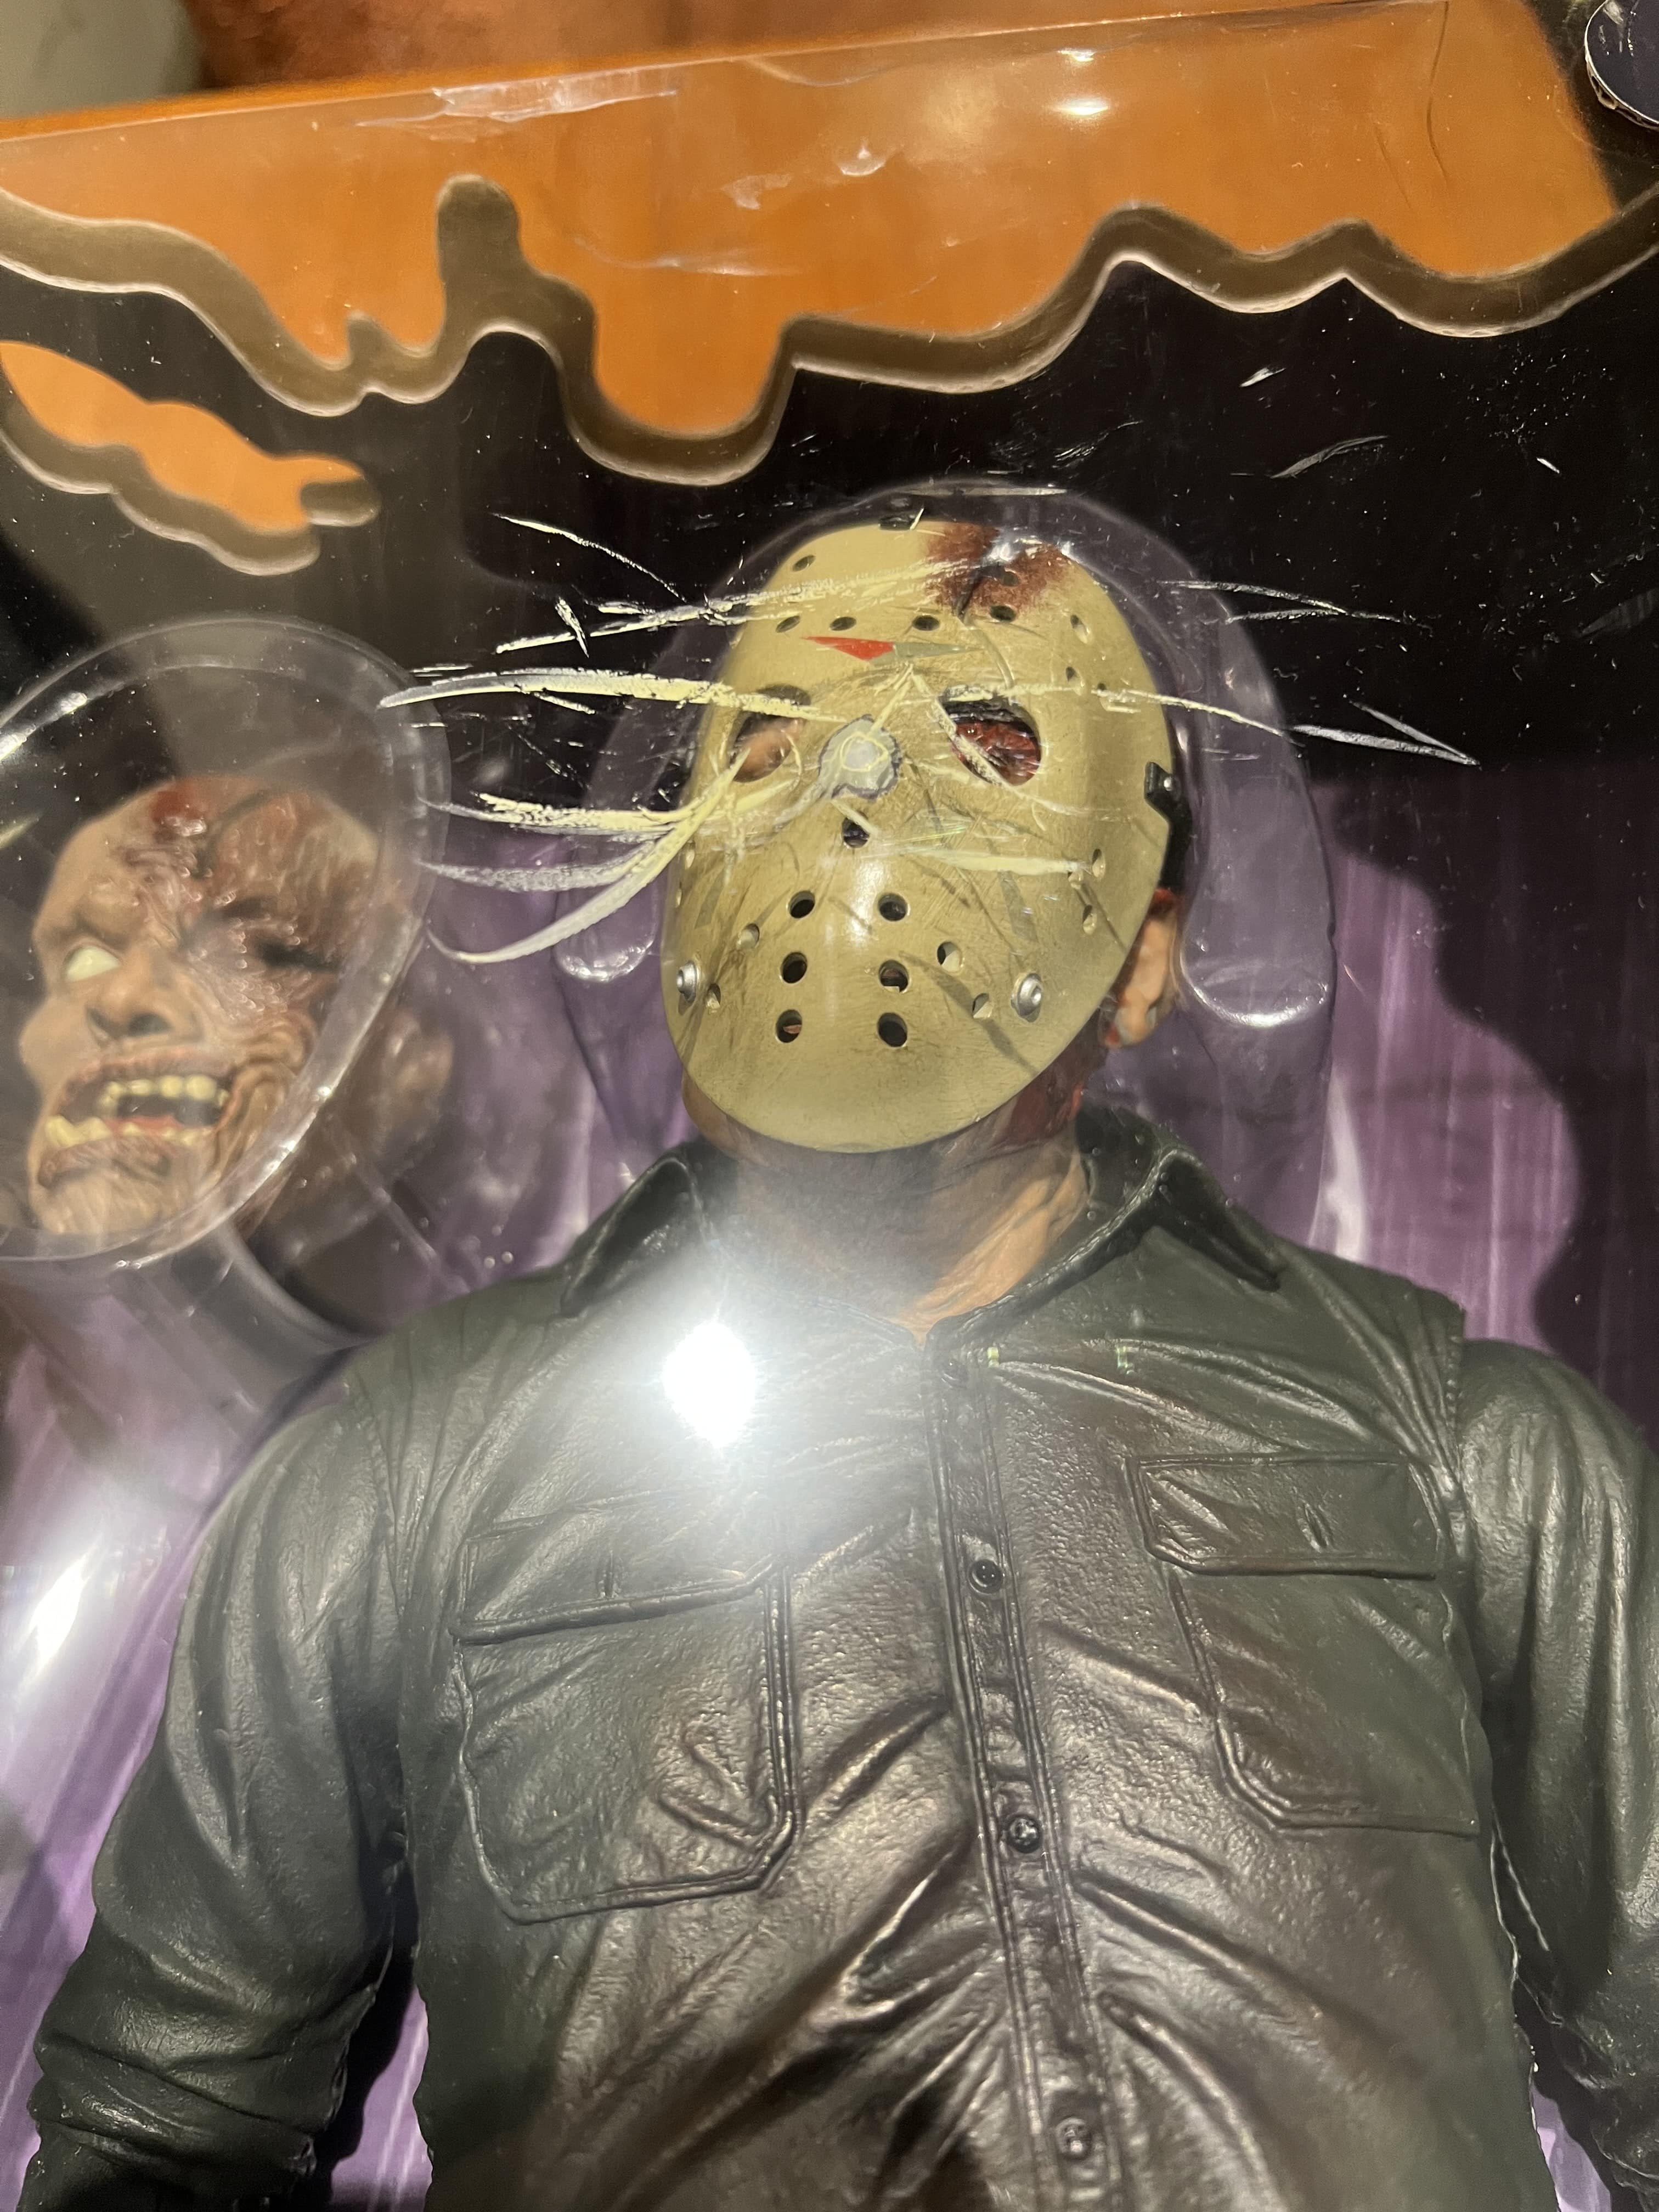 FRIDAY THE 13TH | The Final Chapter - 1/4 Scale Action Figure - Jason Voorhees (Damaged)-NECA-183826-D-Classic Horror Shop